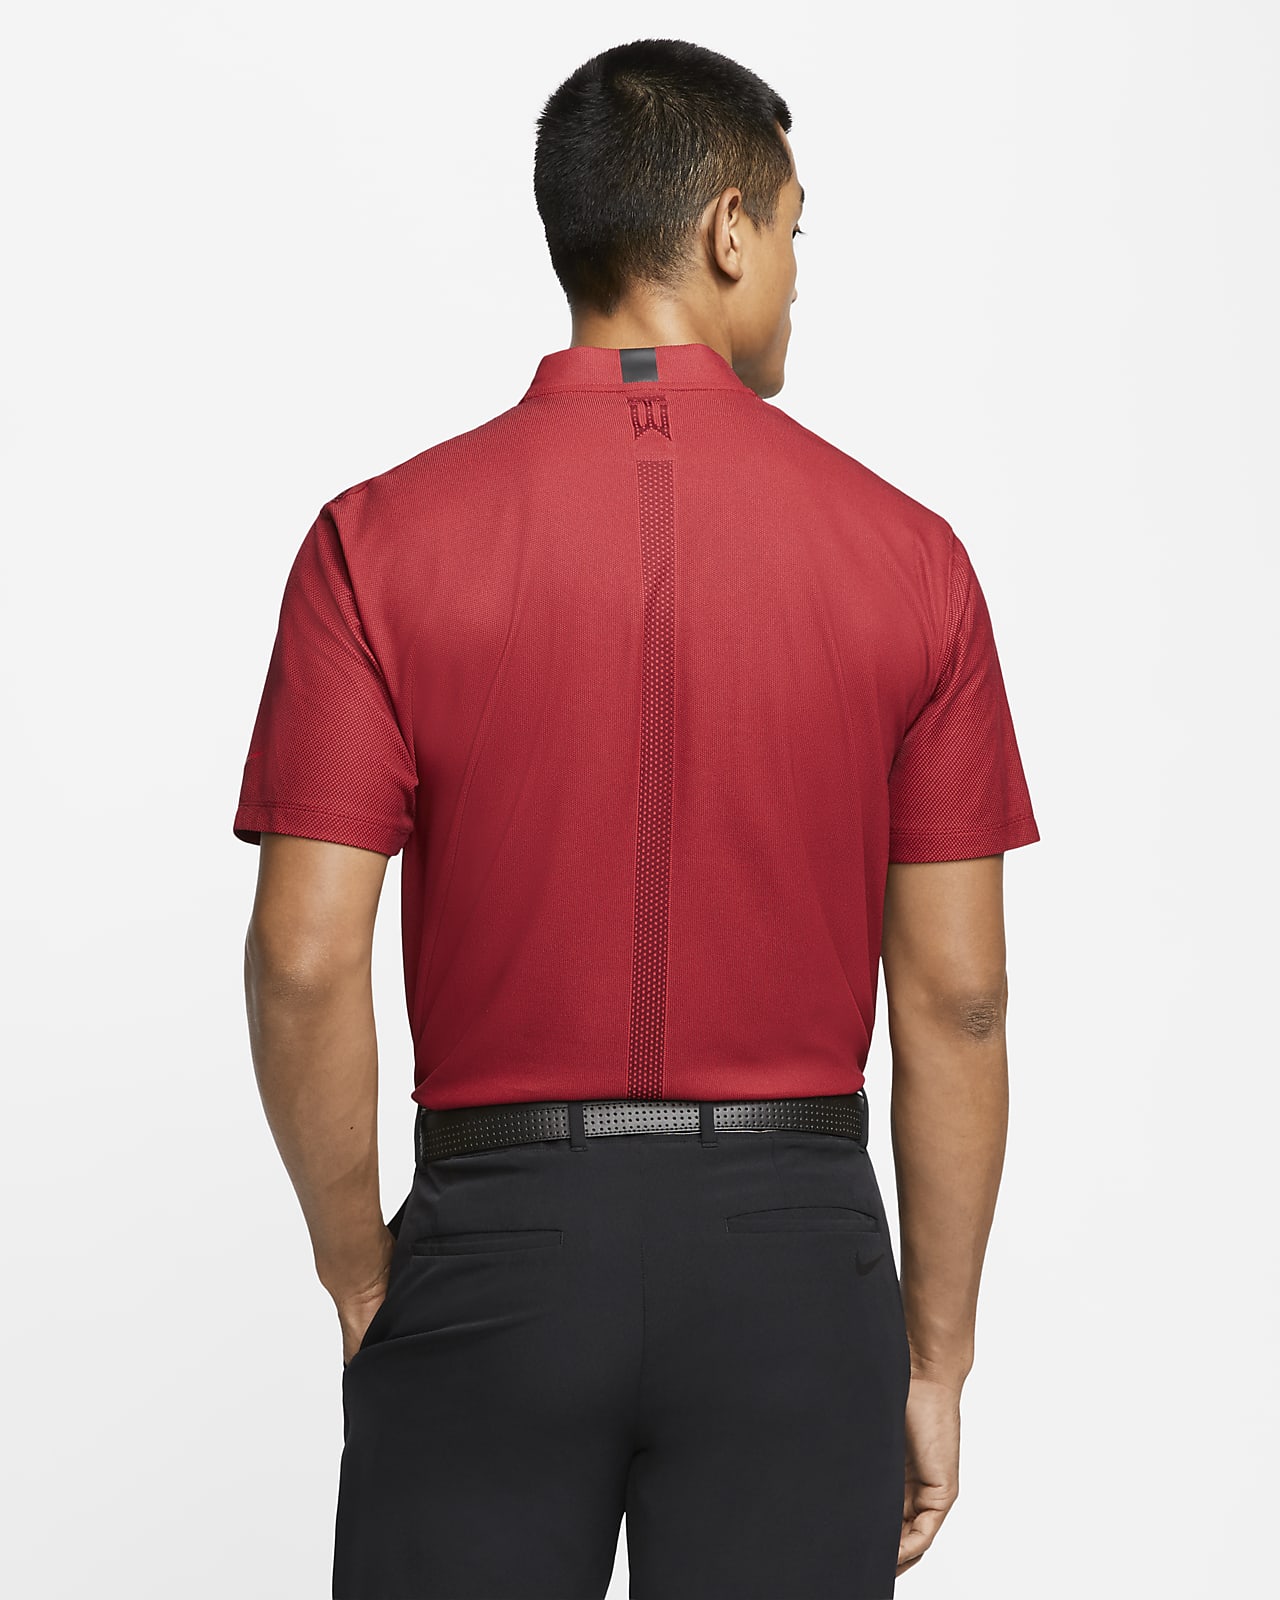 tiger woods polo nike